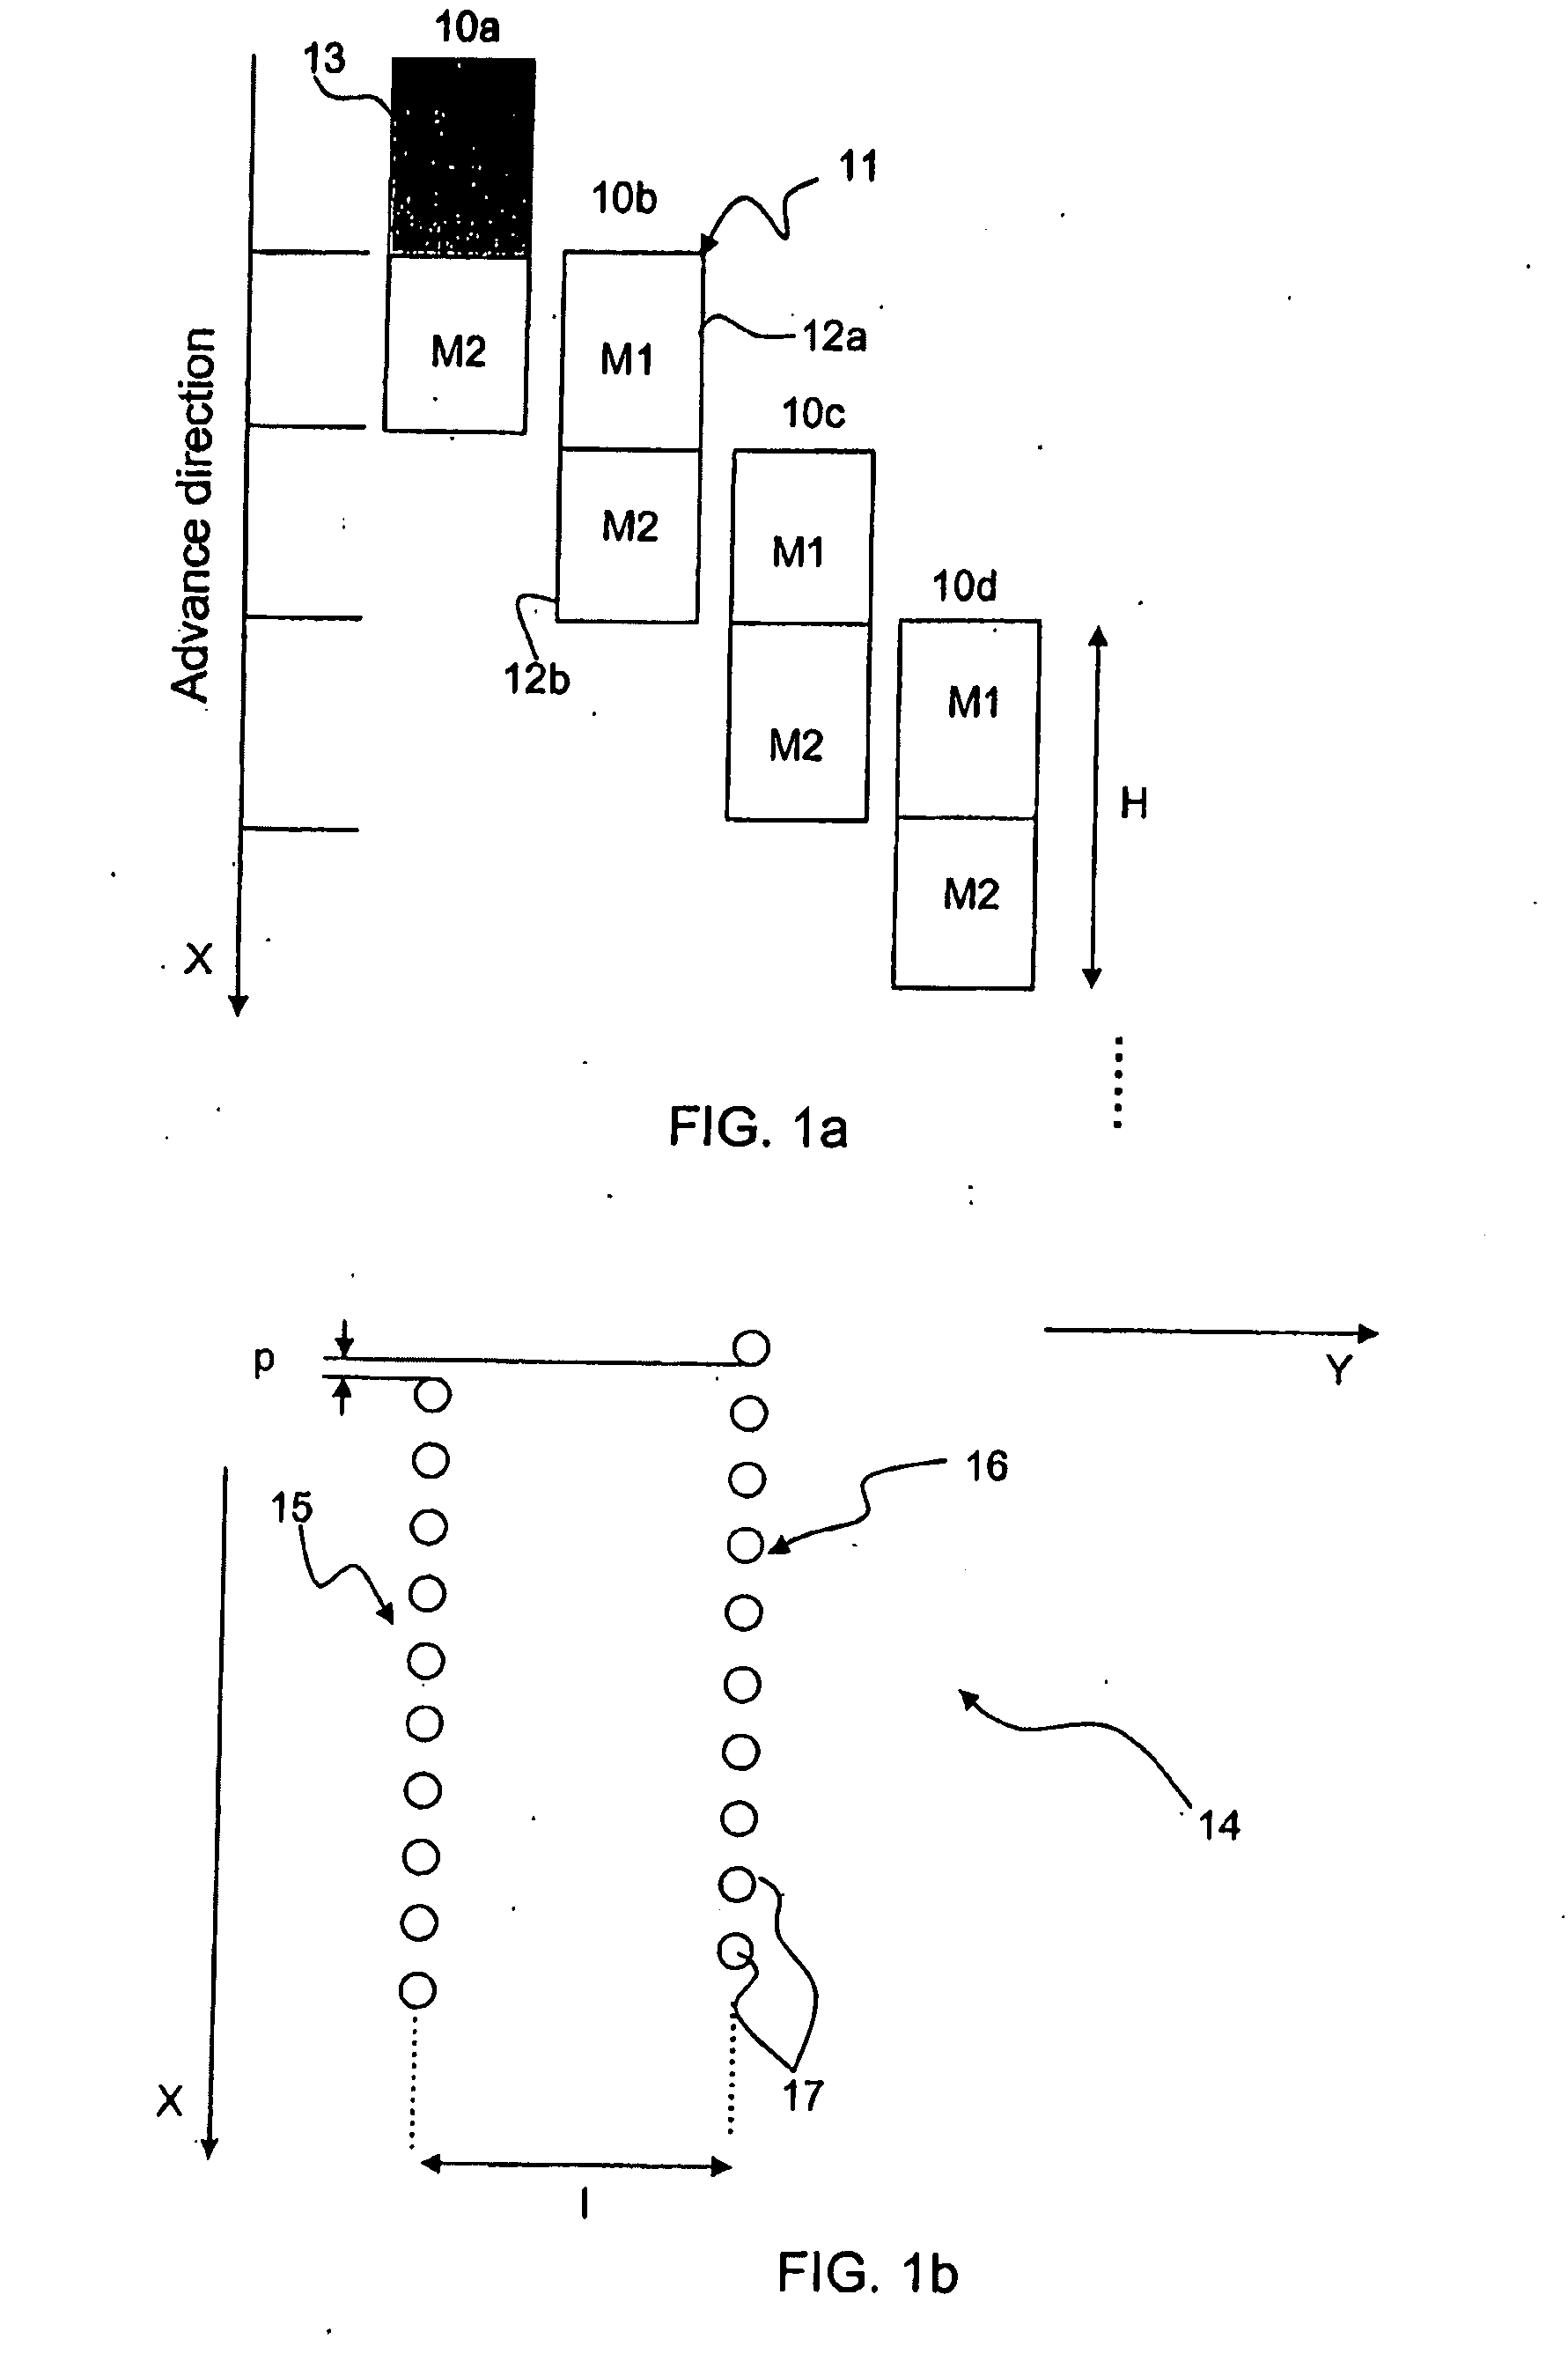 Method and system for high speed multi-pass inkjet printing